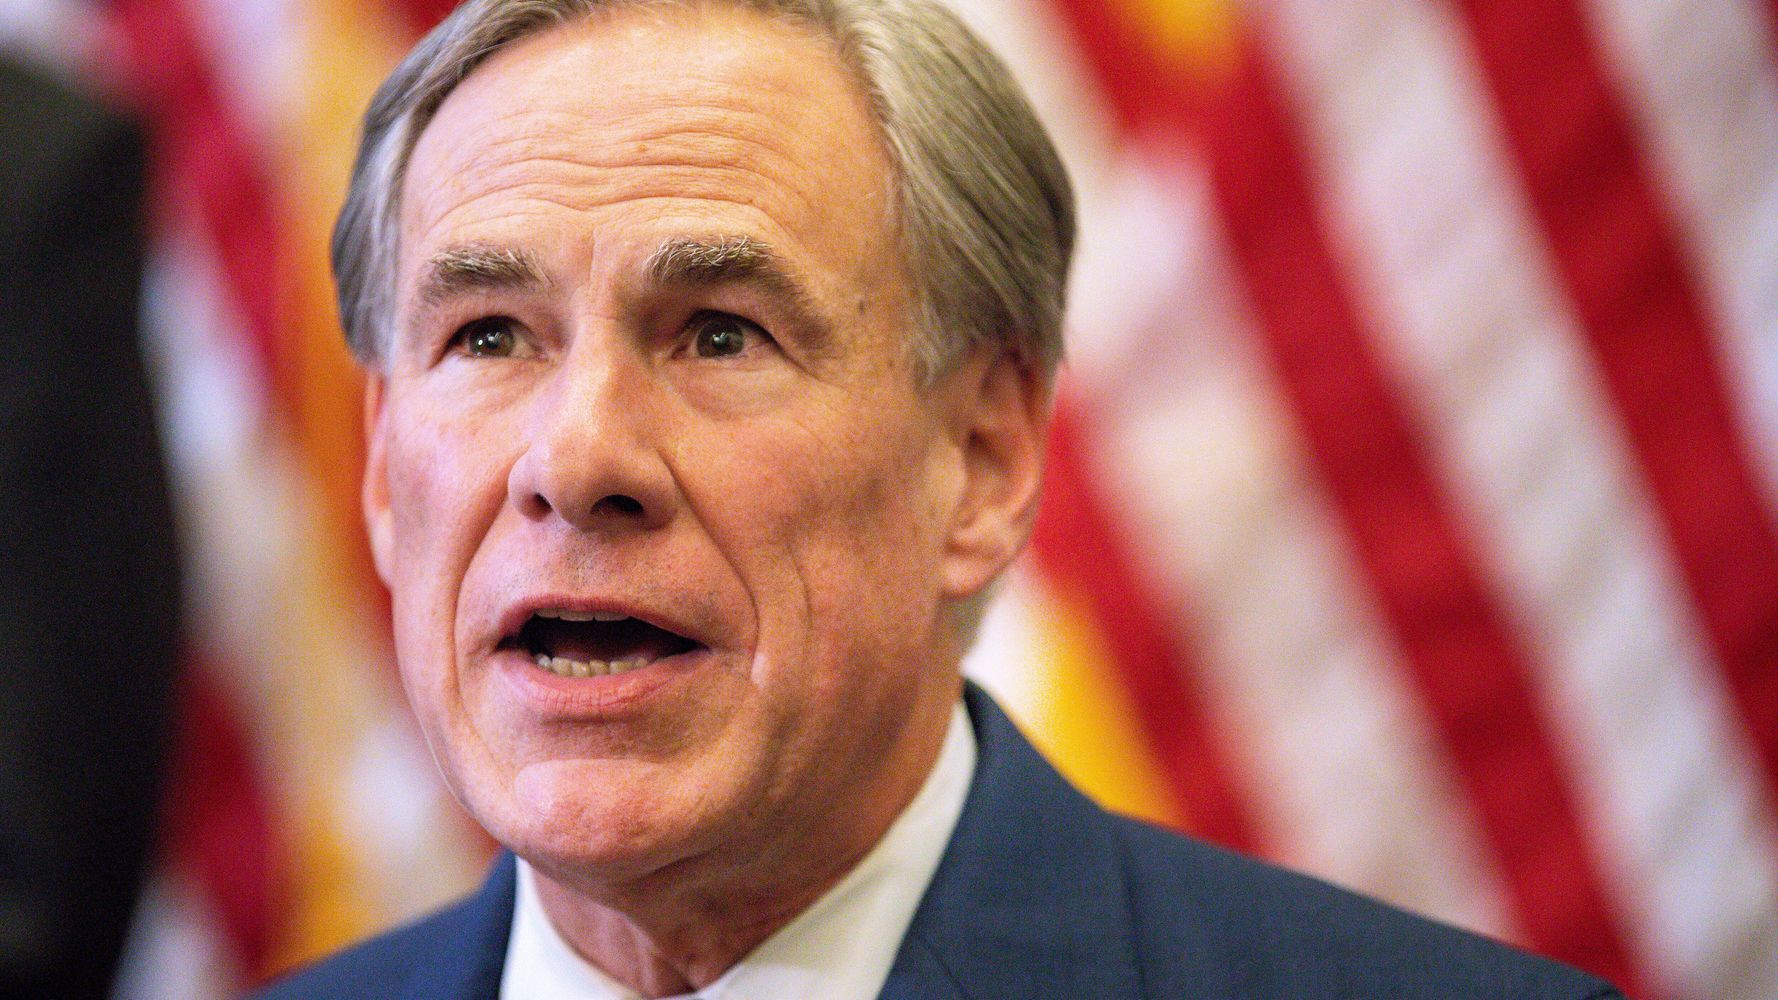 Texas Governor Orders Another Special Session To Pass Restrictive Voting Bill